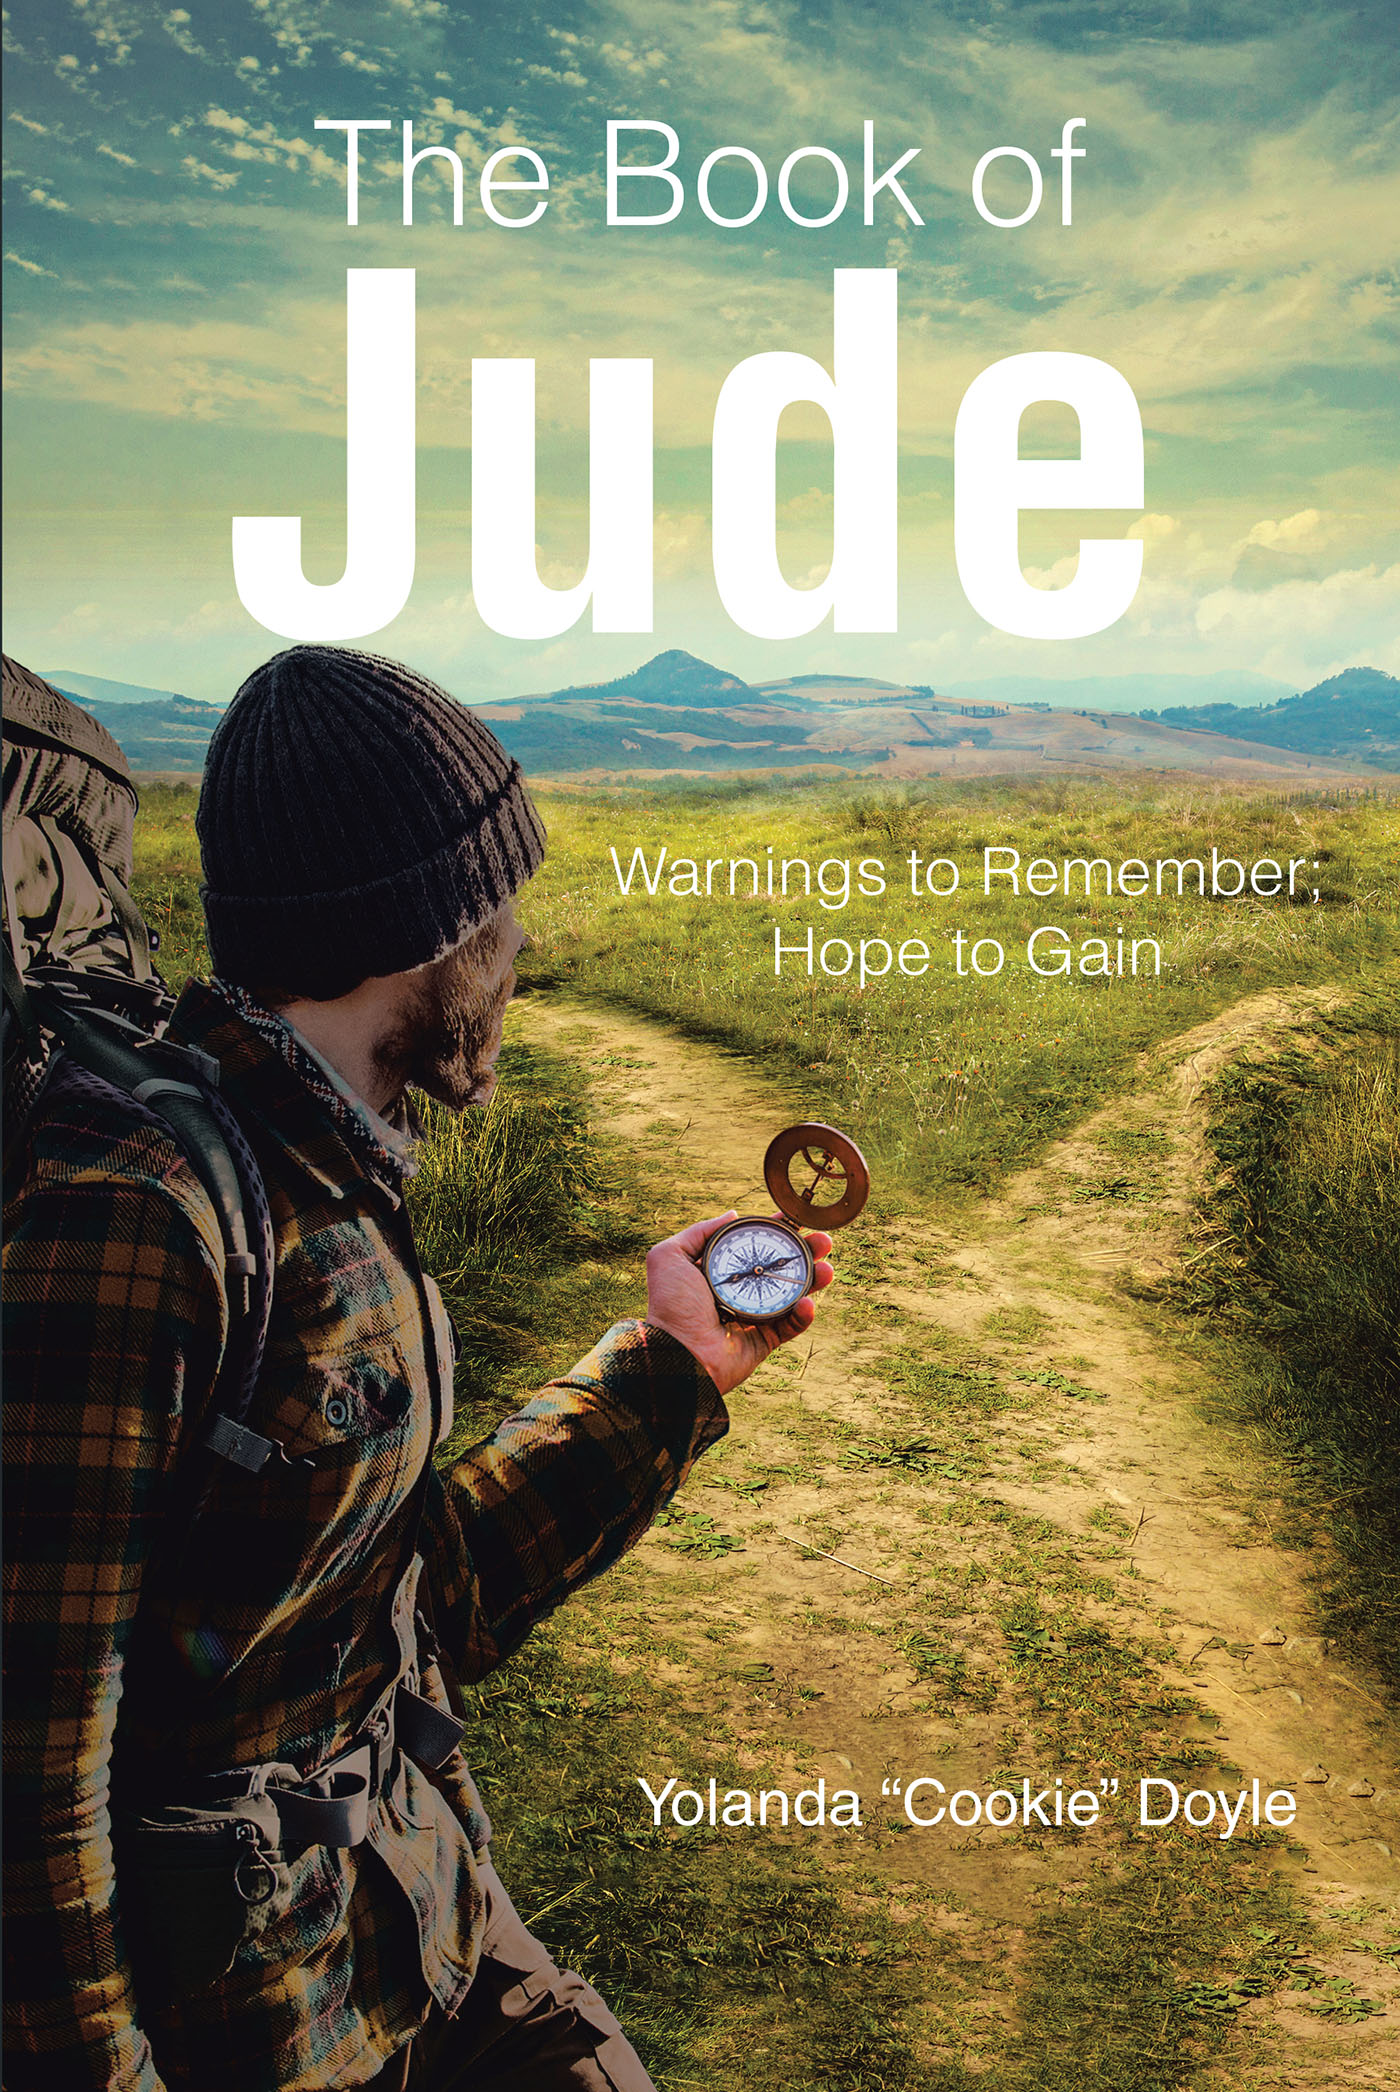 Yolanda “Cookie” Doyle’s Newly Released “The Book of Jude: Warnings to Remember; Hope to Gain” is an Articulate Discussion of Key Scripture